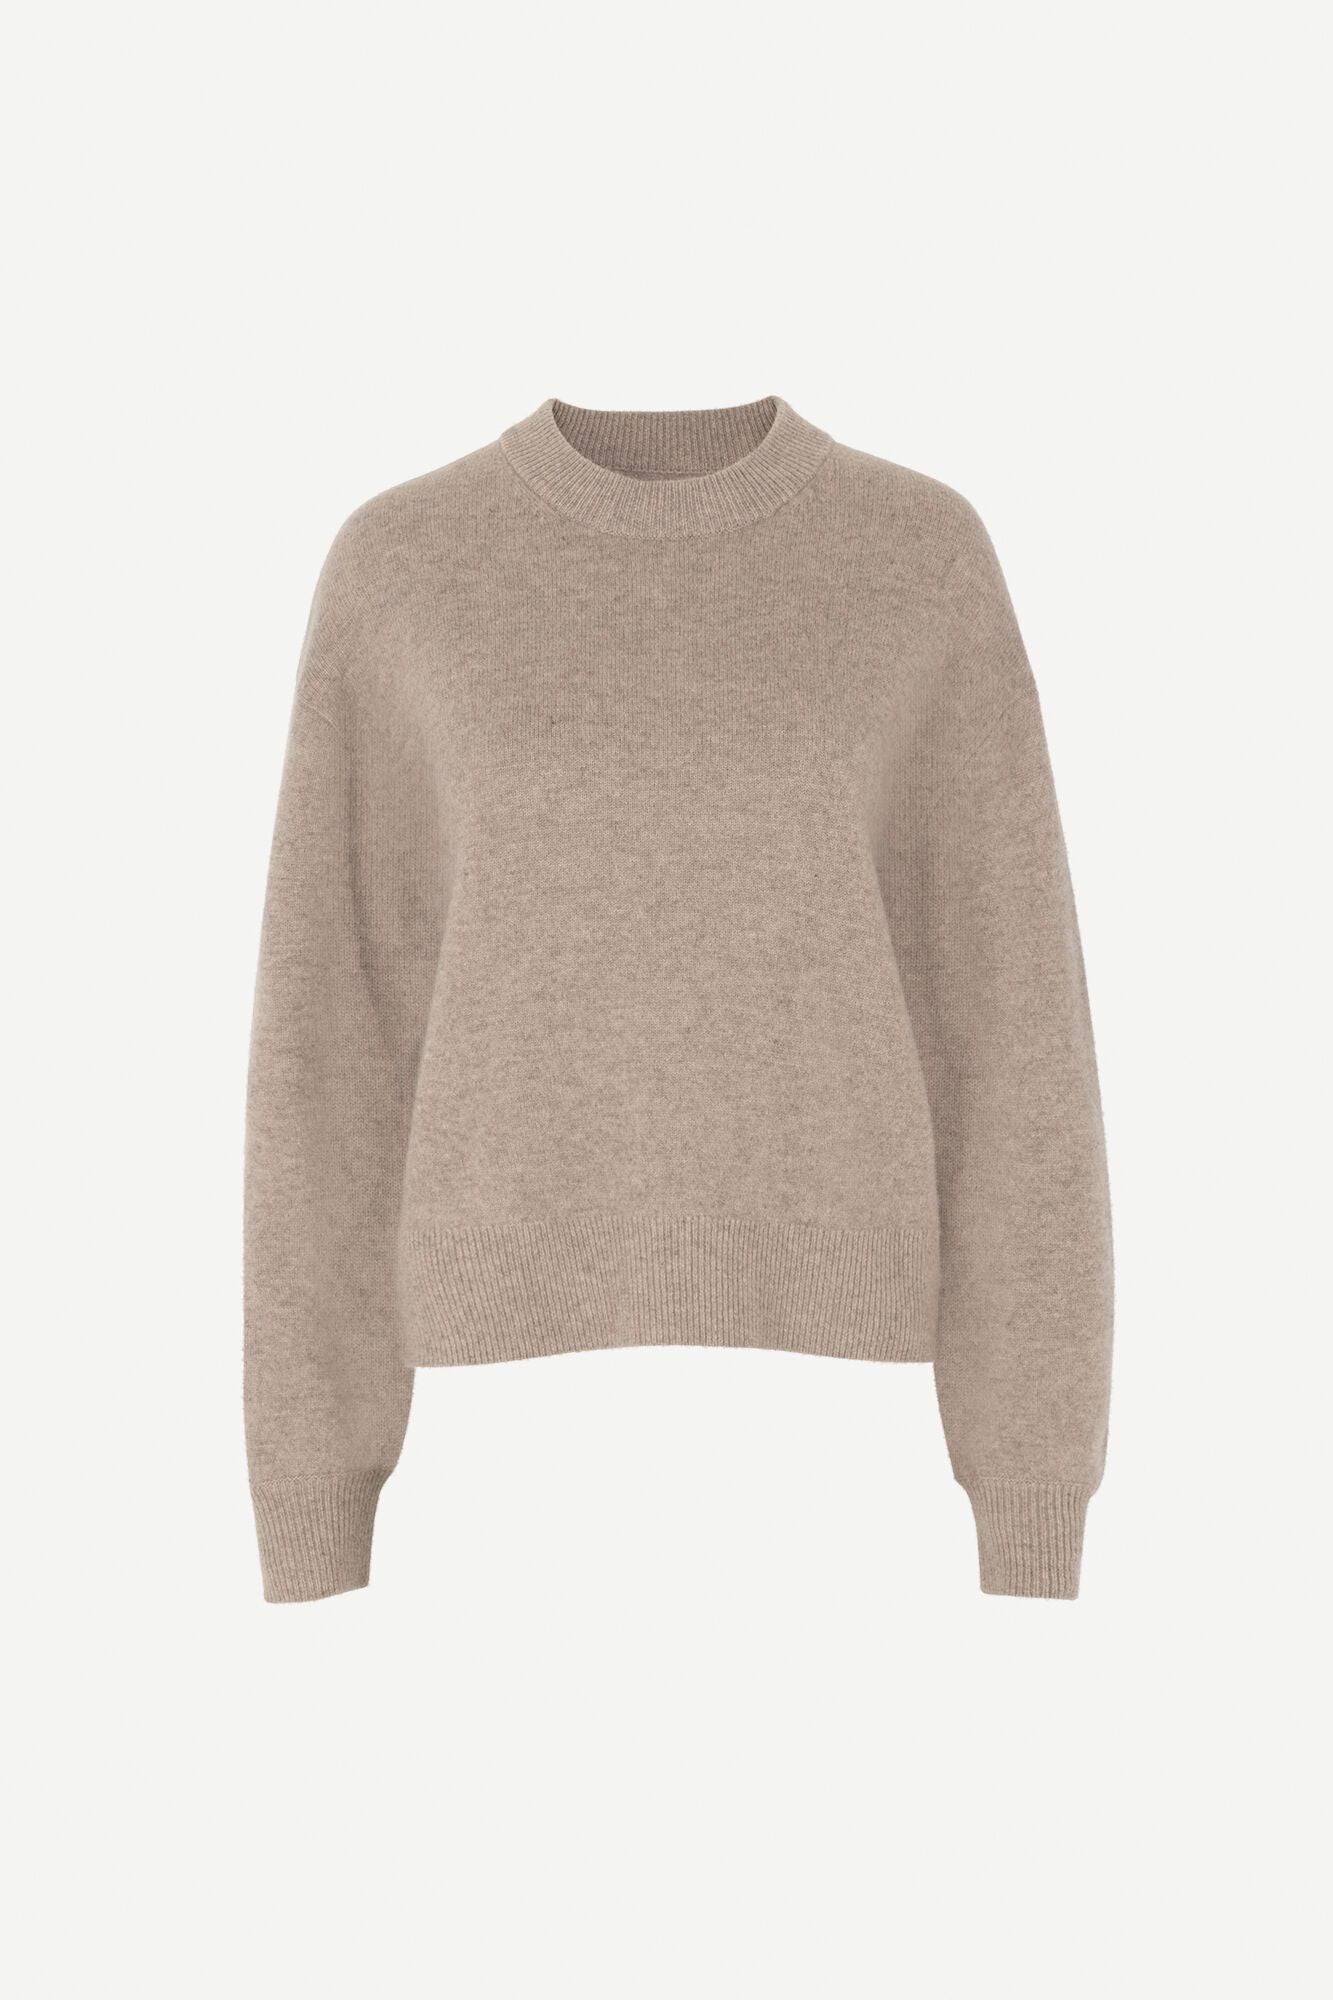 Amaris oversized wool sweater in natural